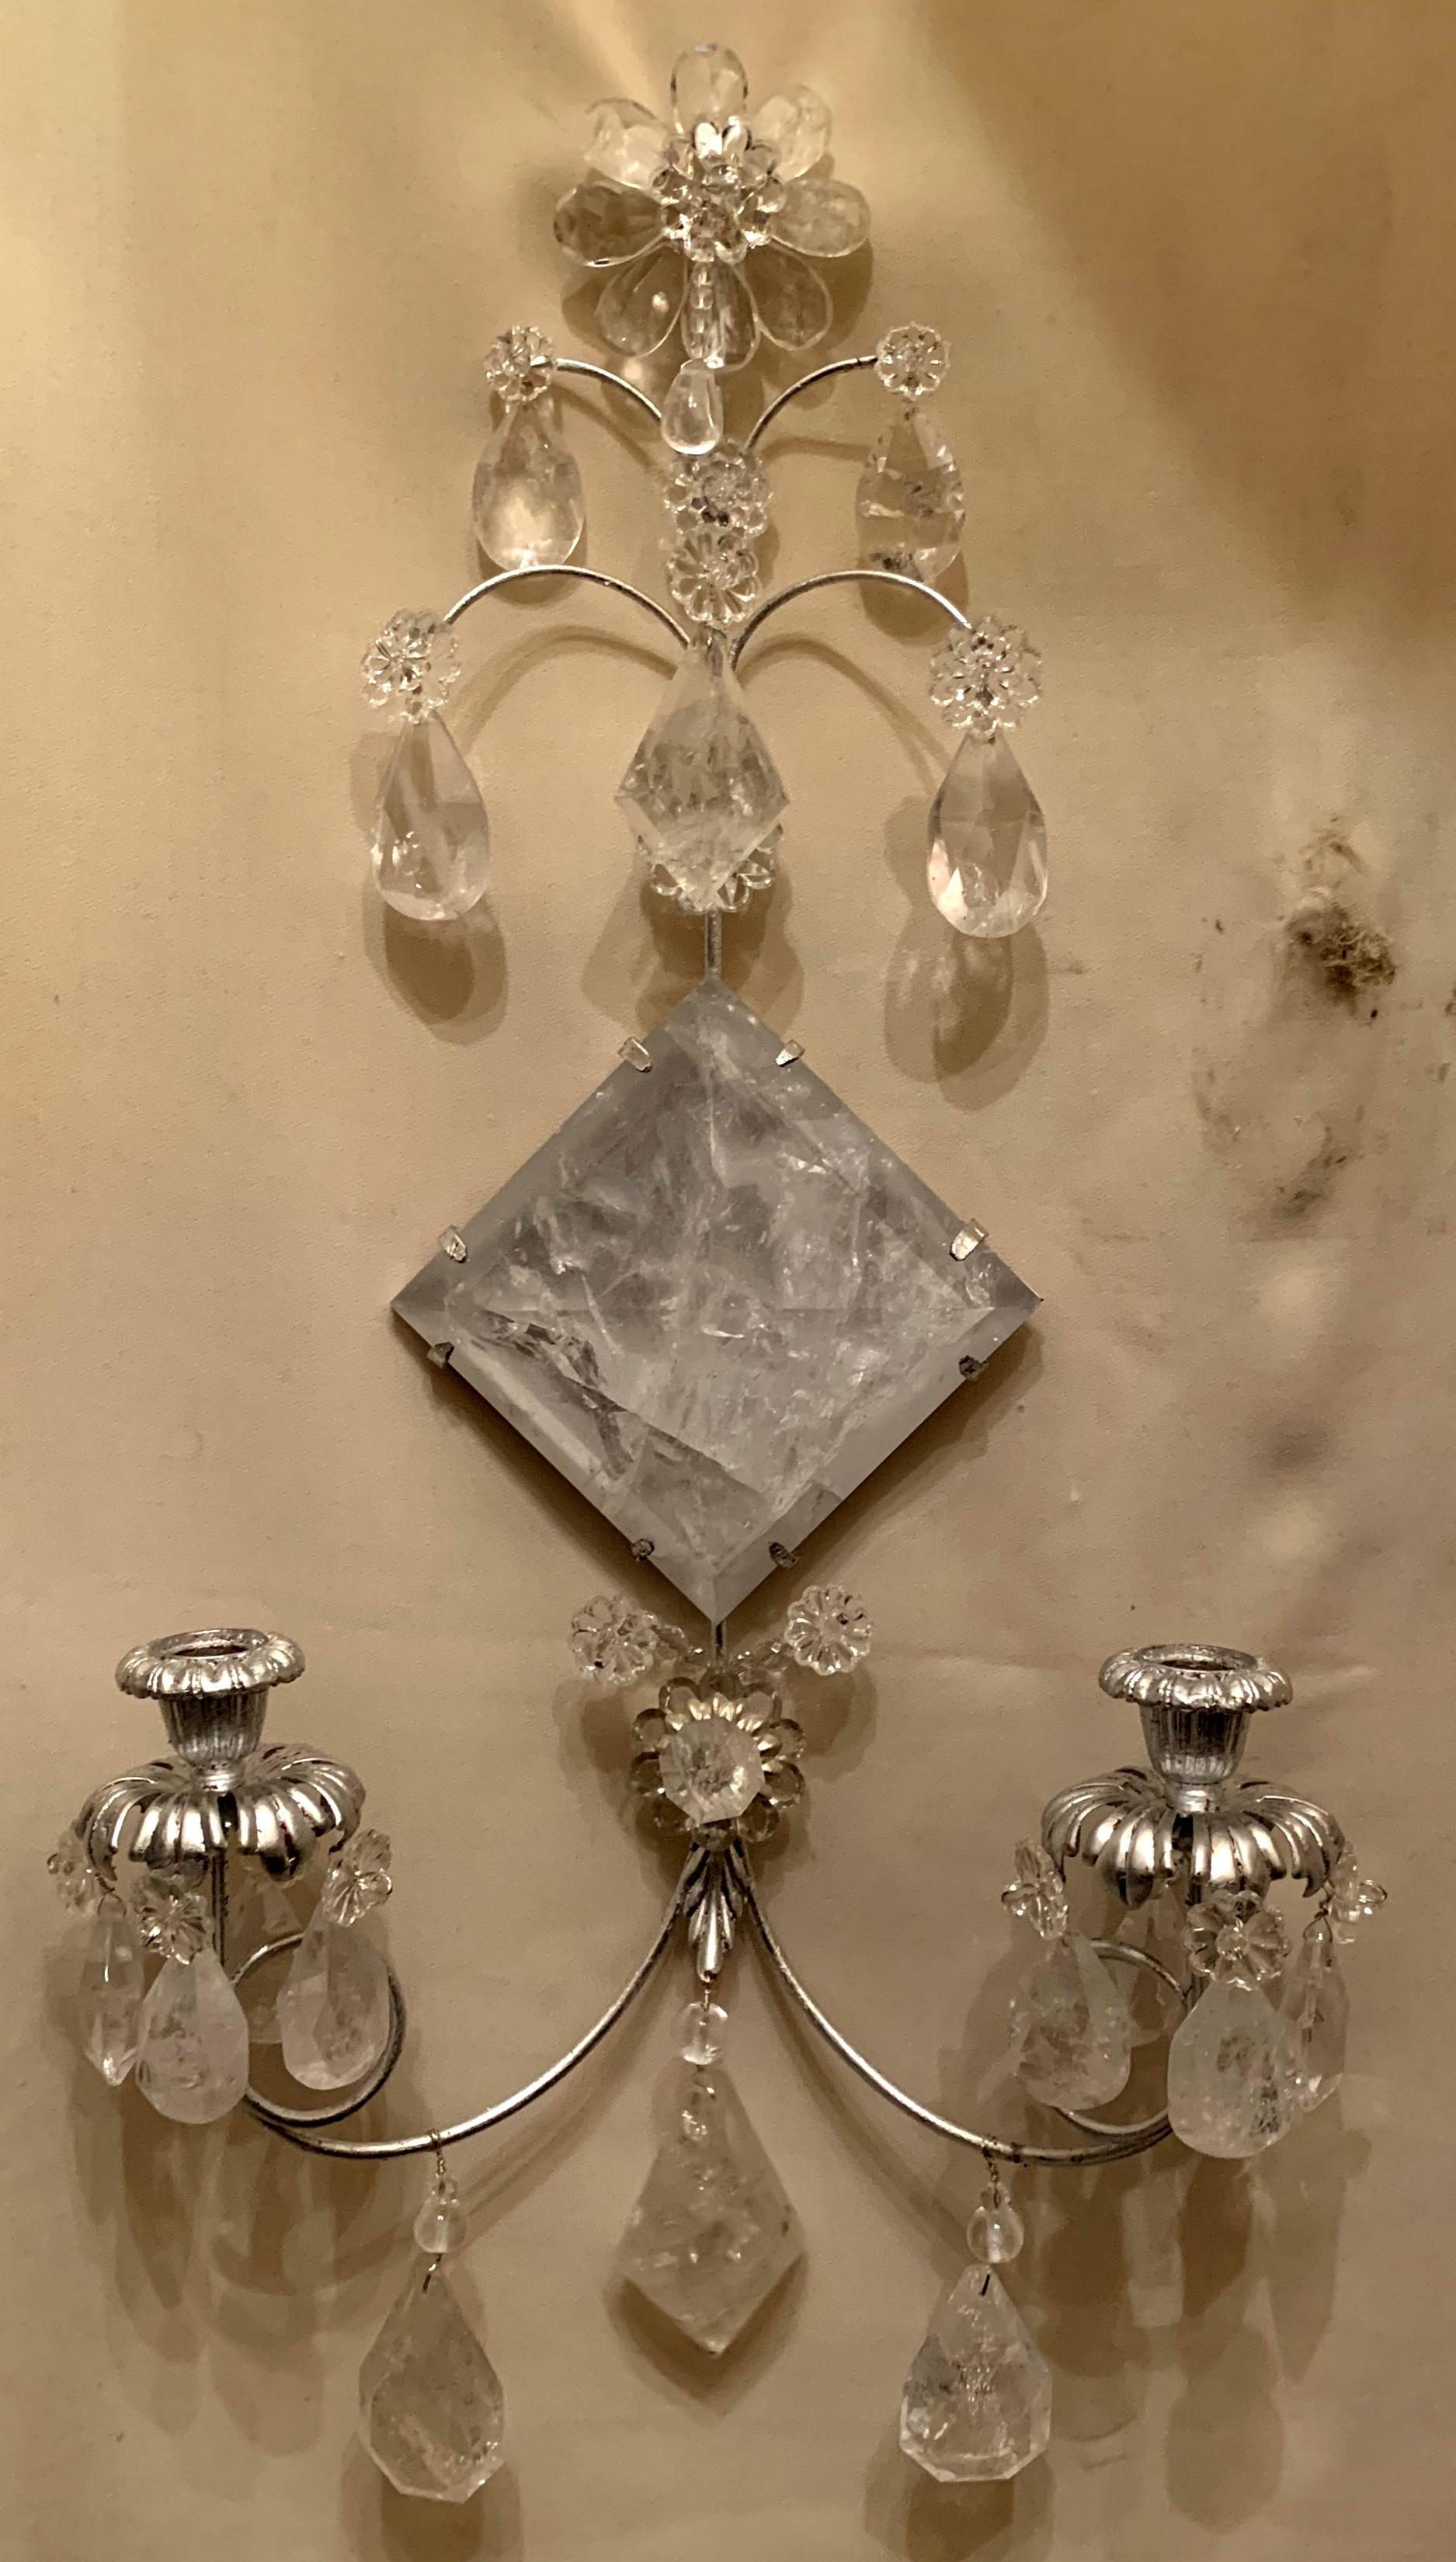 A wonderful Mid-Century Modern pair of transitional silver leaf and rock crystal sconces
Also available in gold leaf.

Wiring is available.